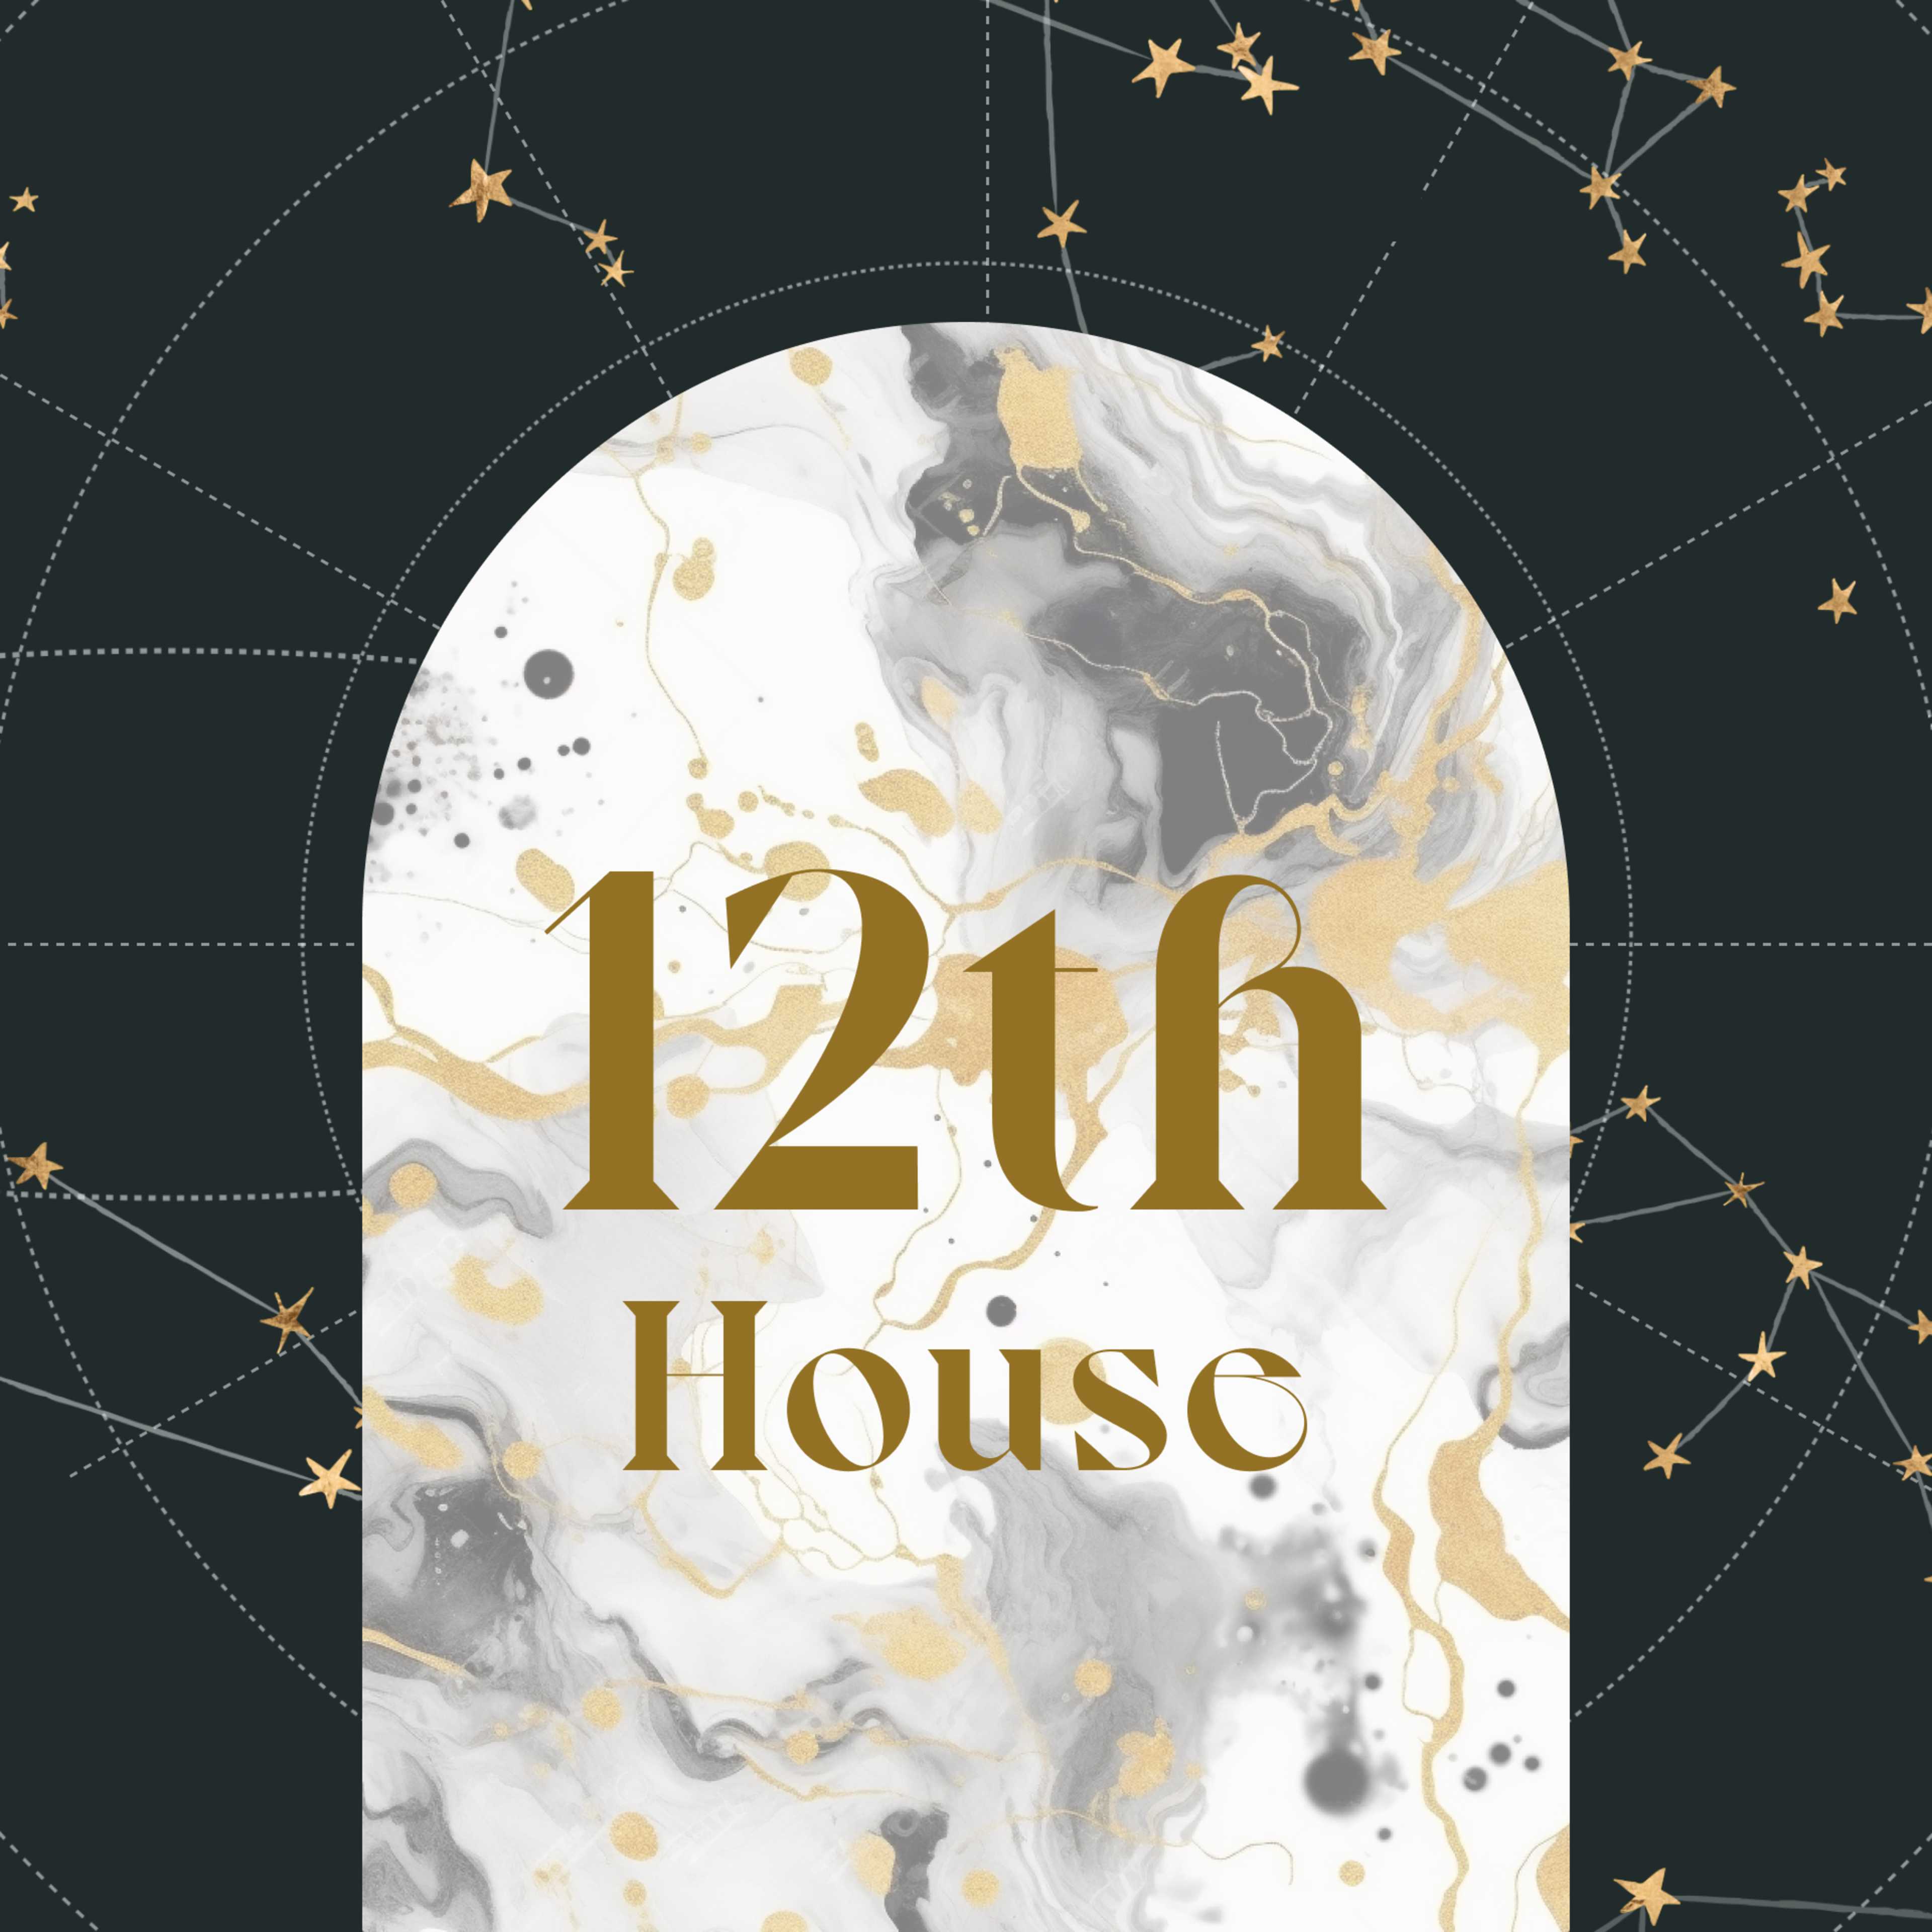 Twelfth House in Astrology